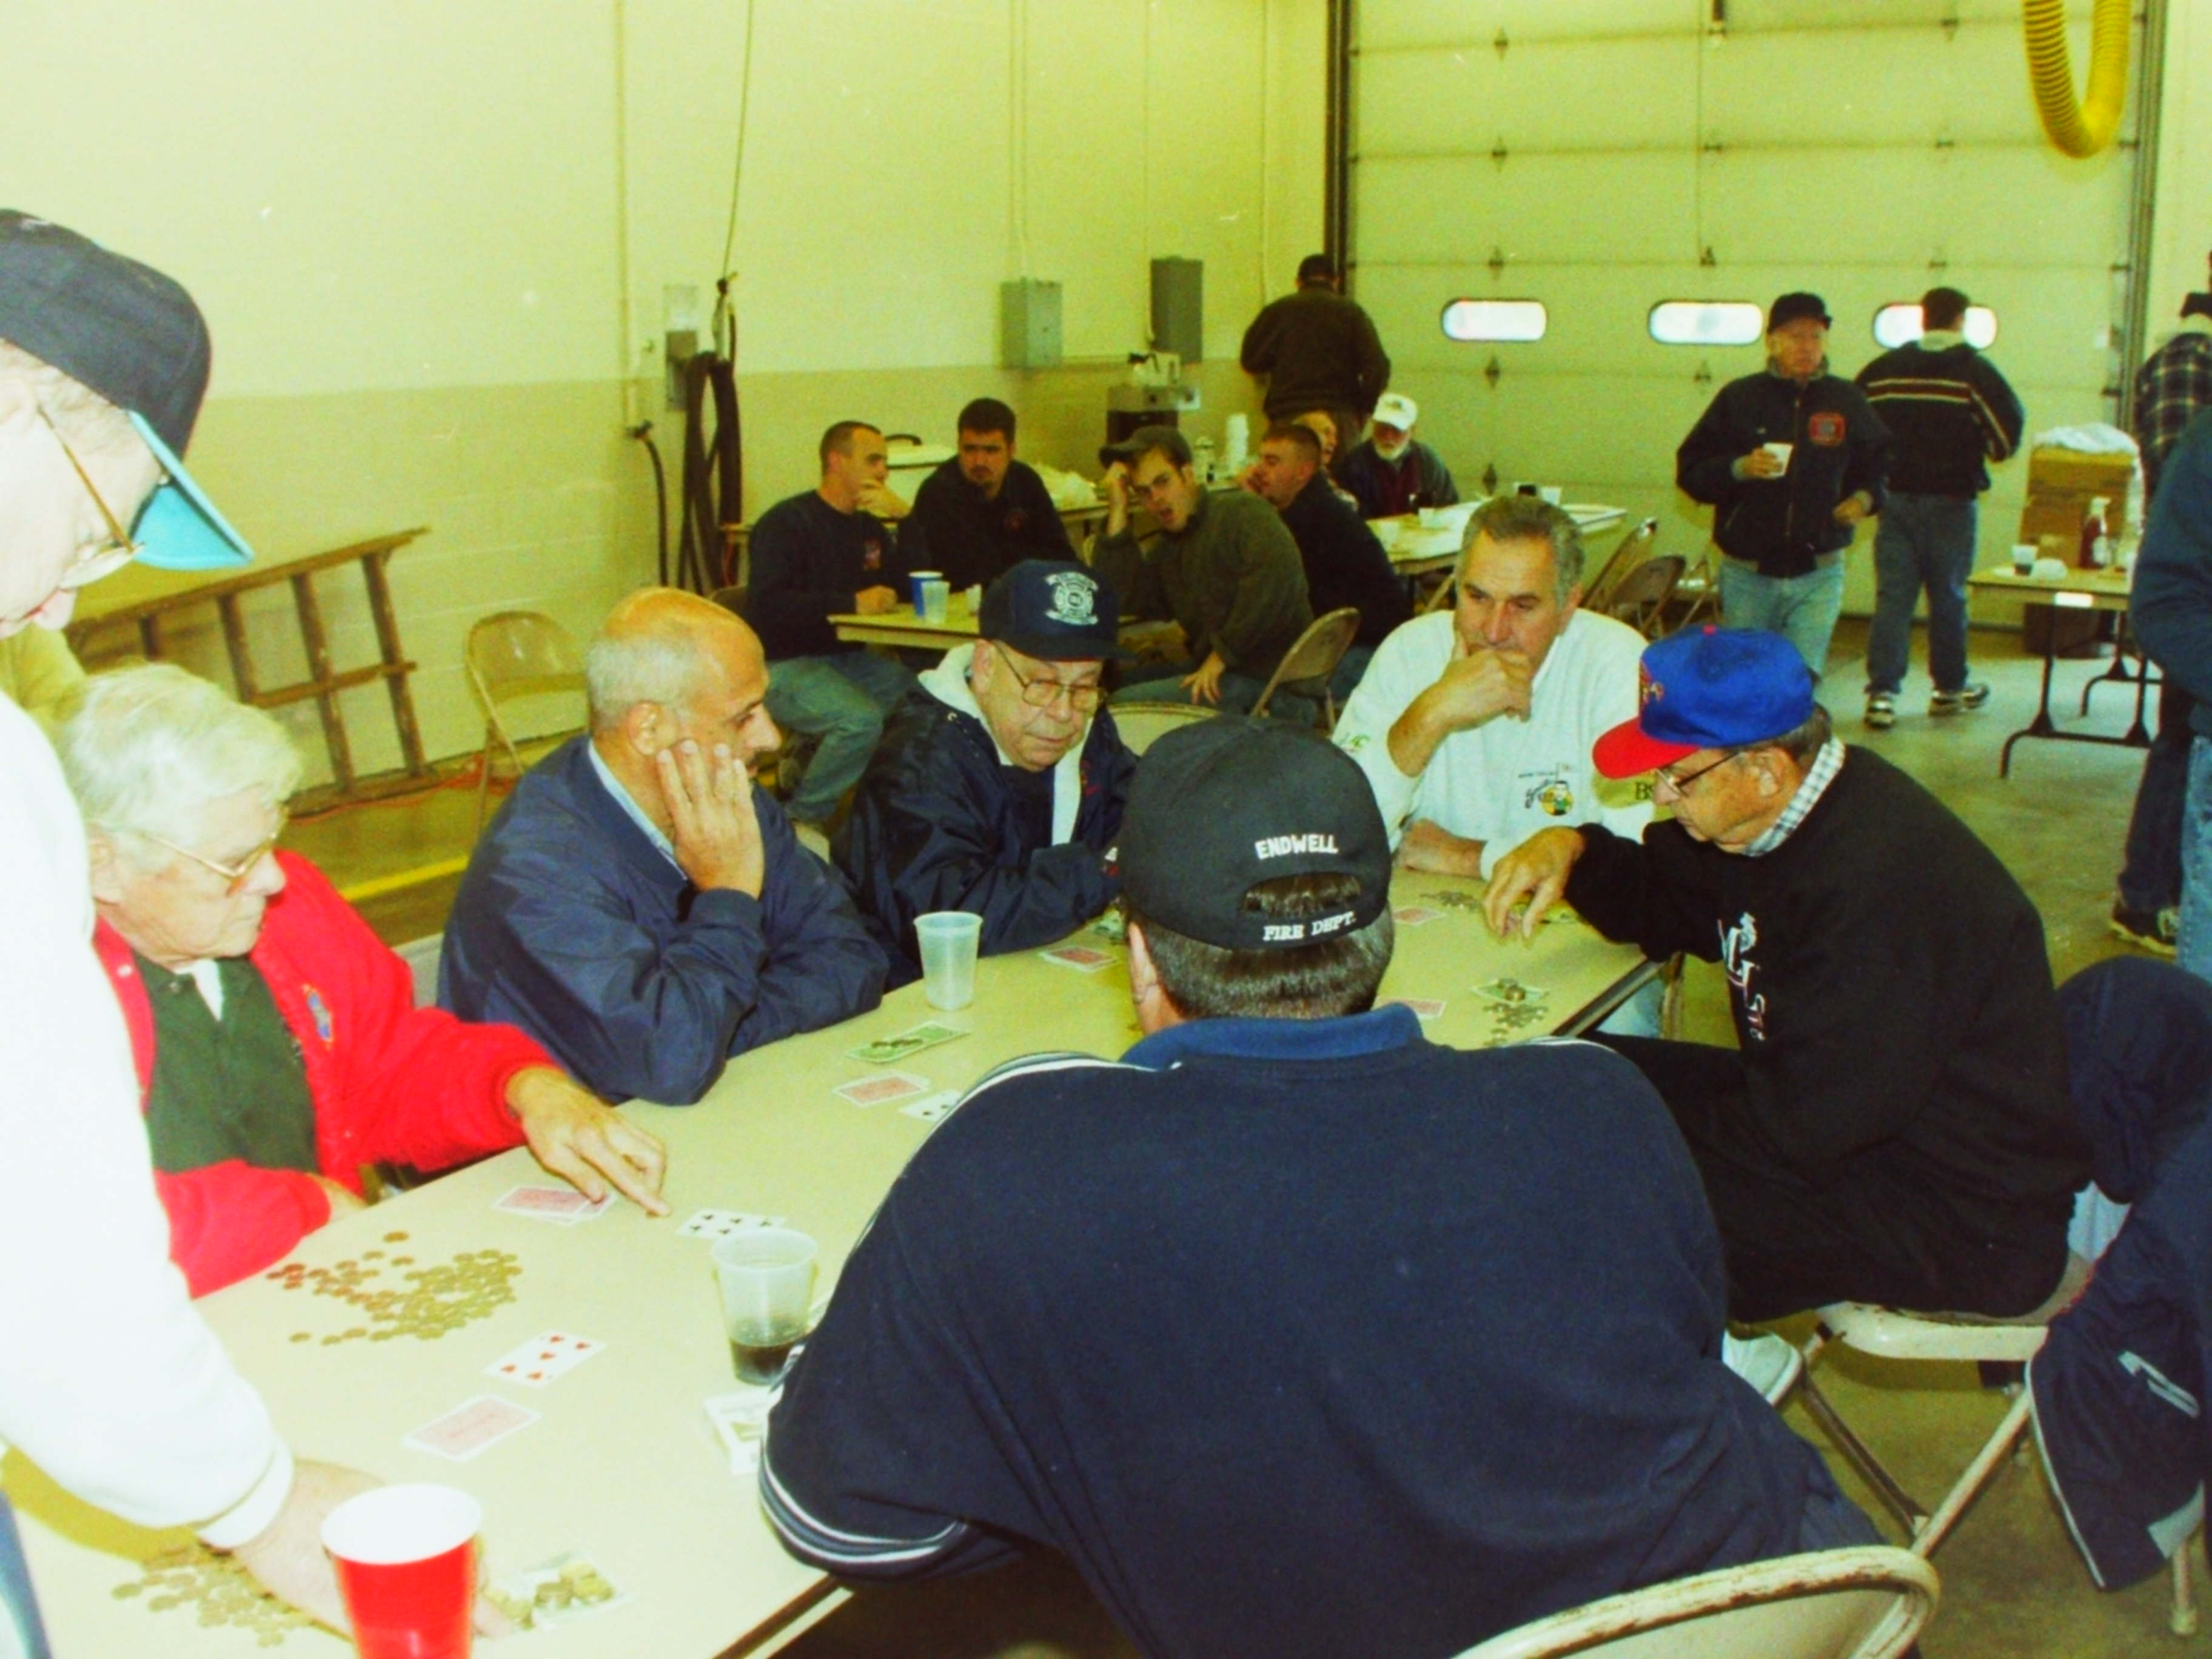 07-10-01  Other - O.L.D. Clambake